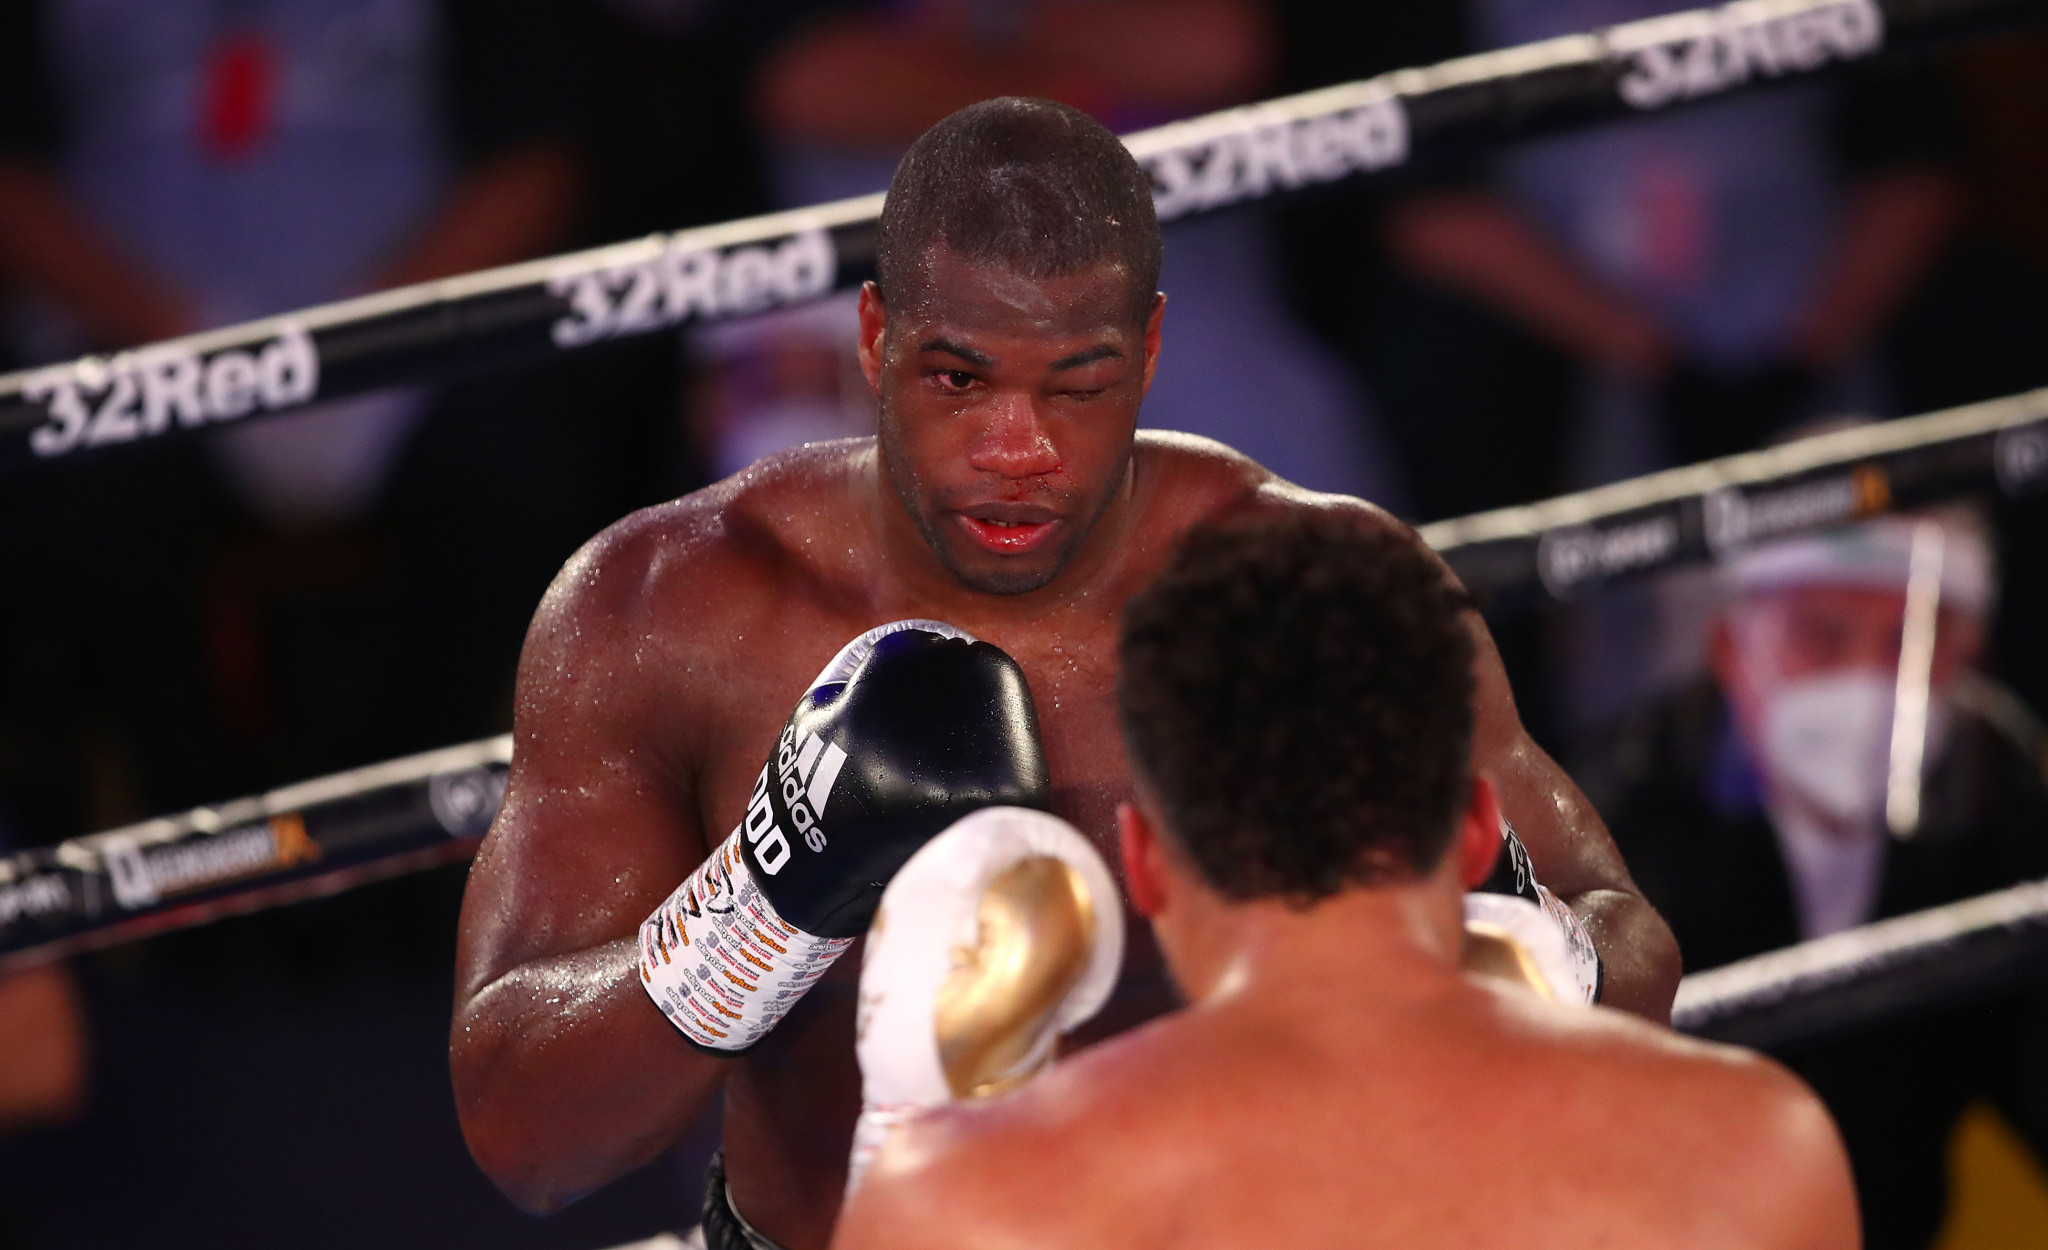 Dubois battled on despite the injury to his left eye before eventually succumbing in round ten against Joyce ©Getty Images